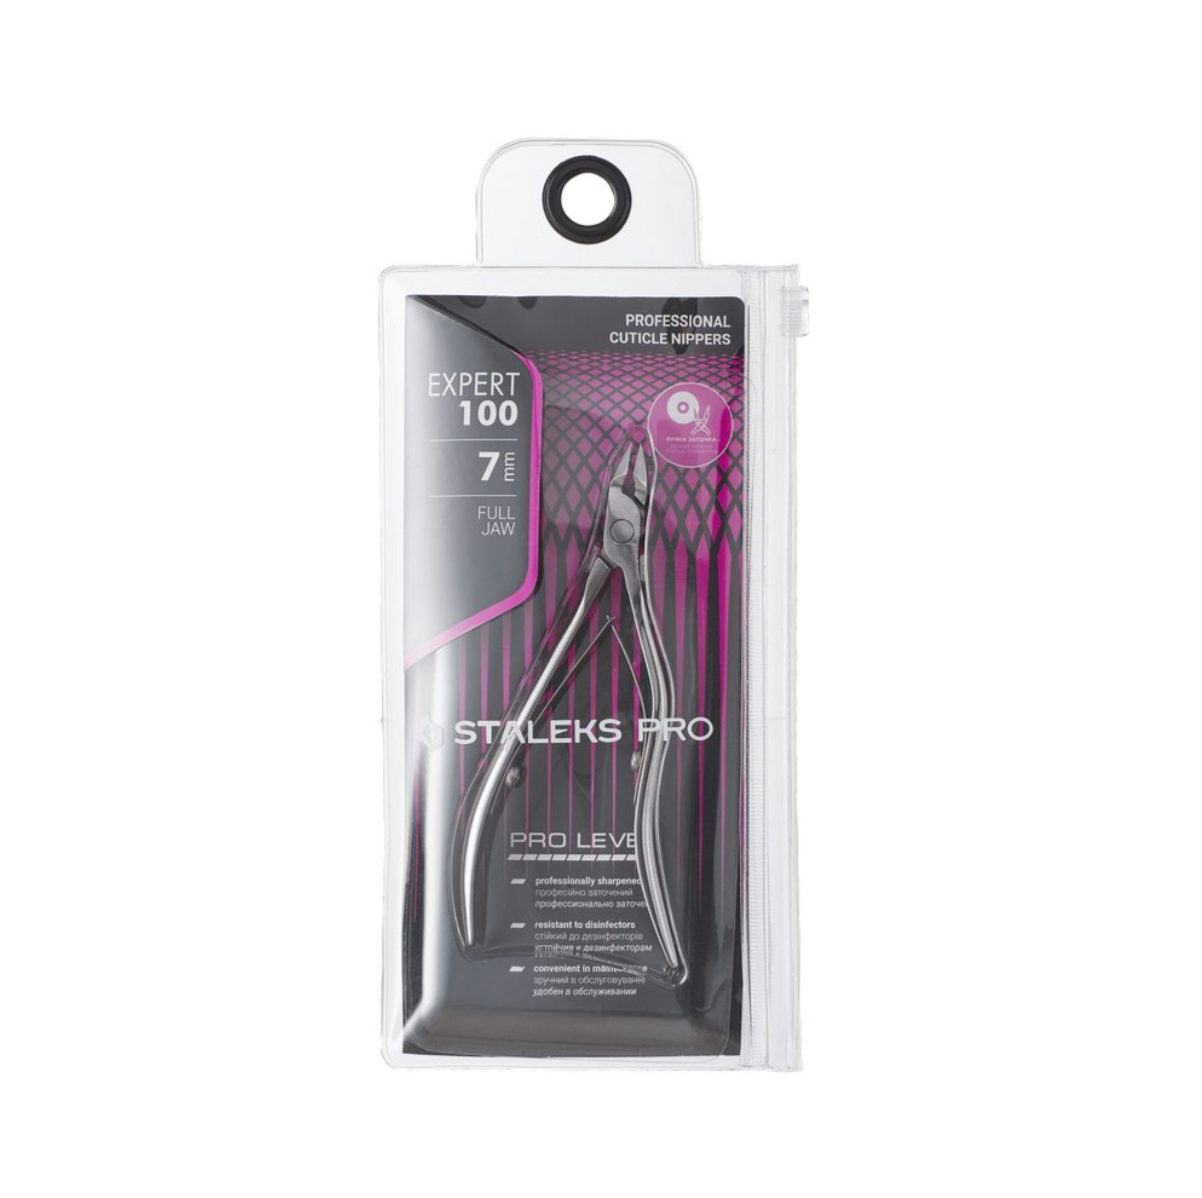 EXPERT 100 | 7 mm - Cuticle Nippers